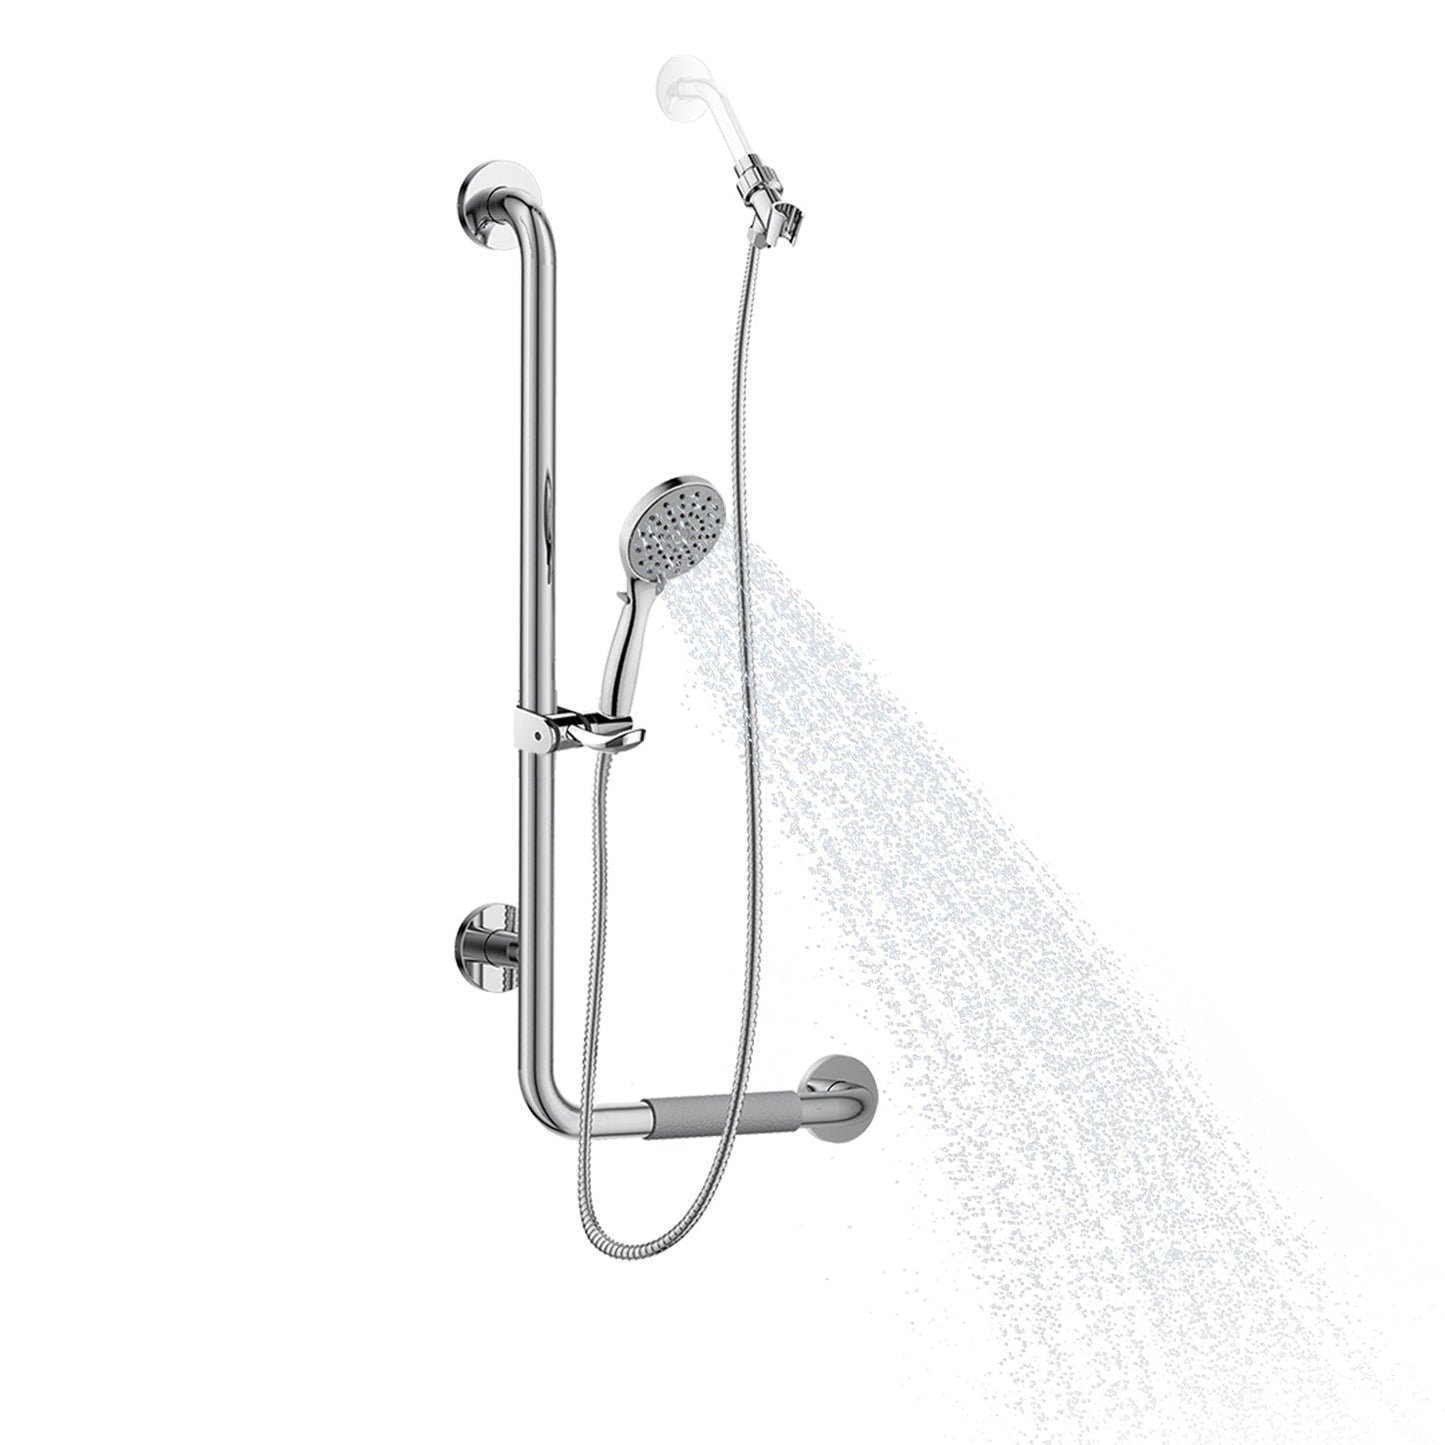 PULSE ShowerSpas Ergo Slide Bar and Grab Bar Left Installation in Polished Stainless Steel Finish With Multi Function Hand Shower